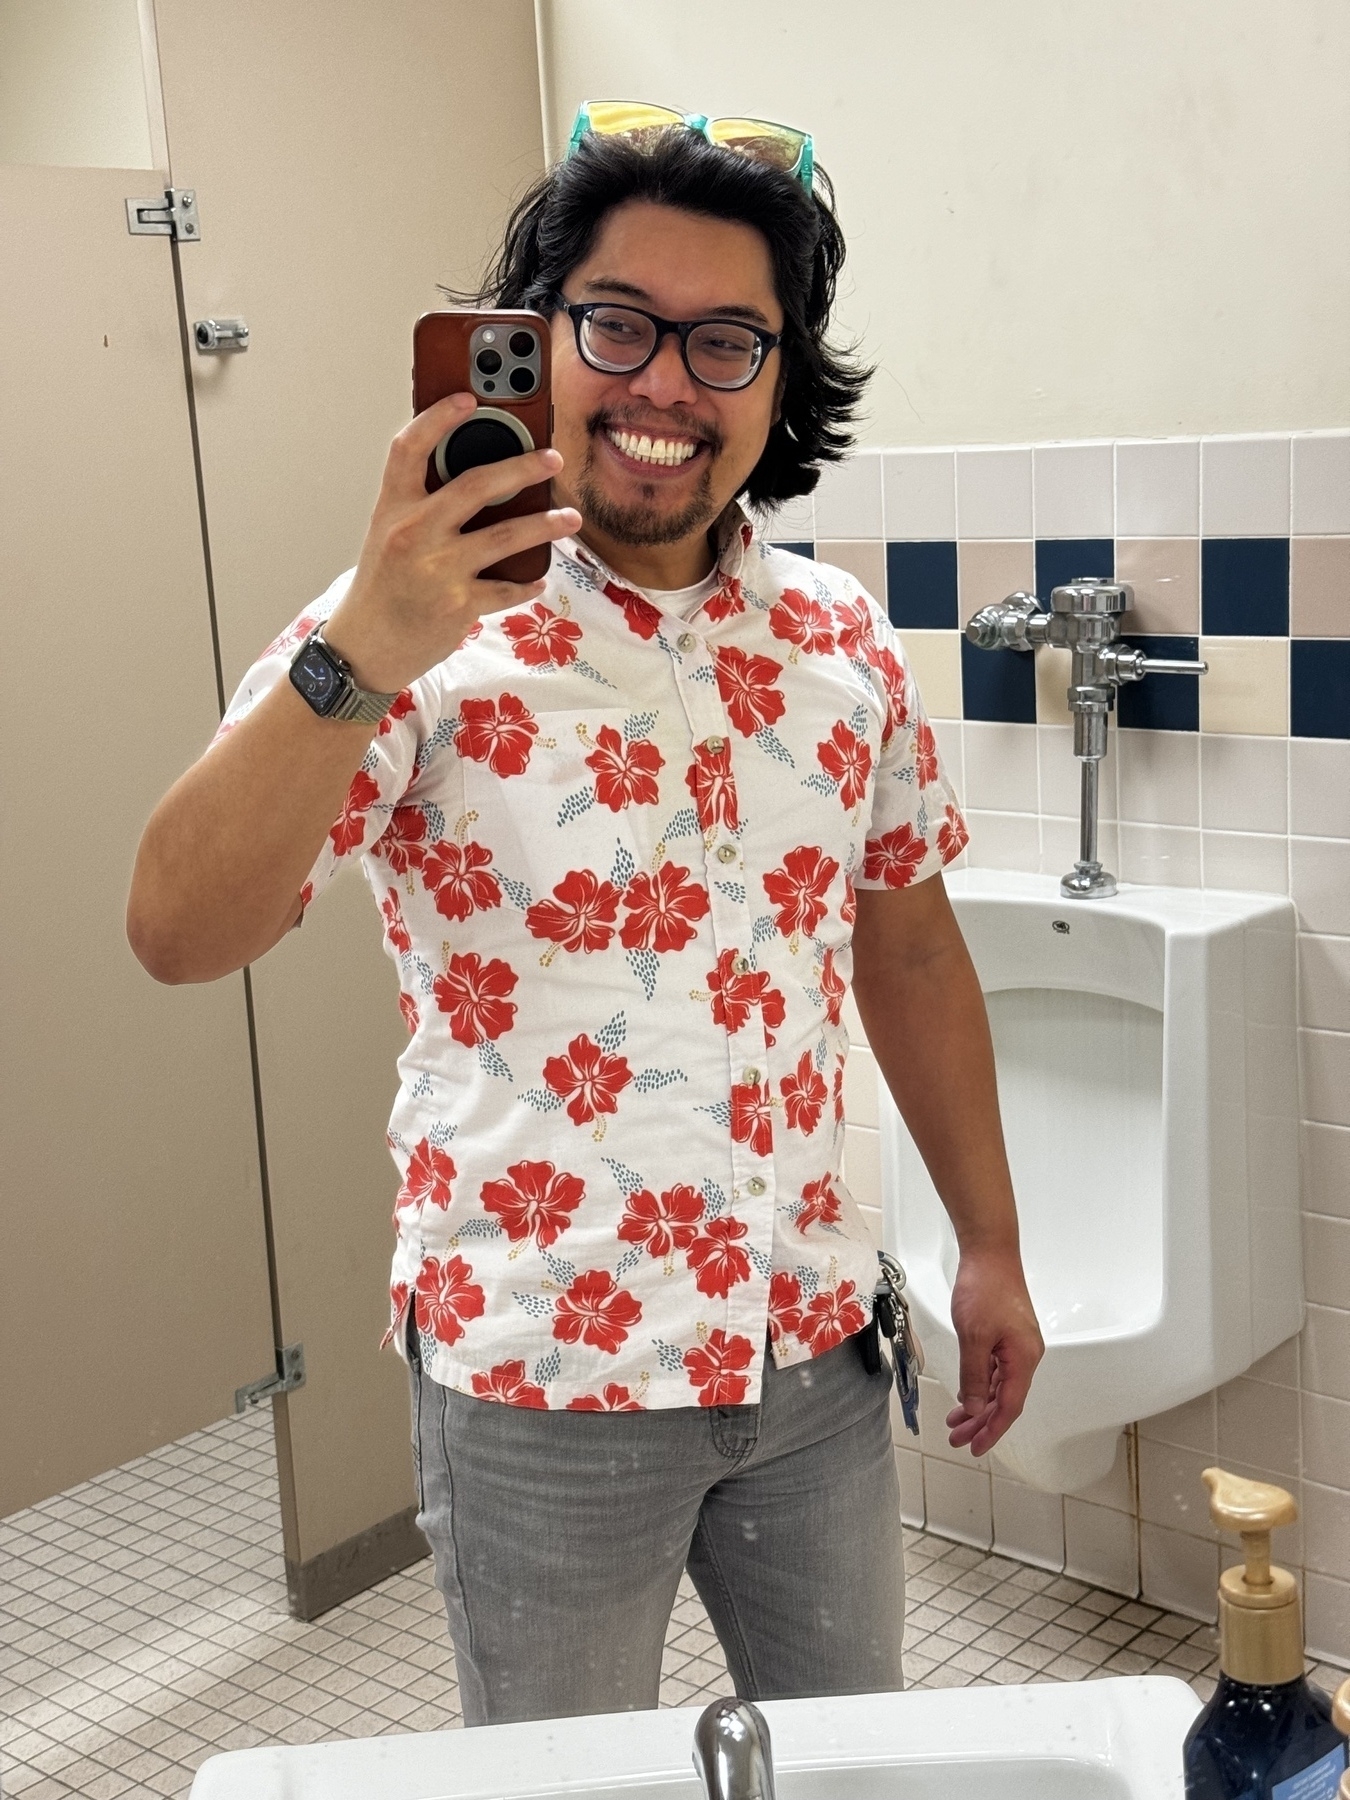 A smiling man wearing glasses, a floral shirt, and jeans takes a selfie in a bathroom.